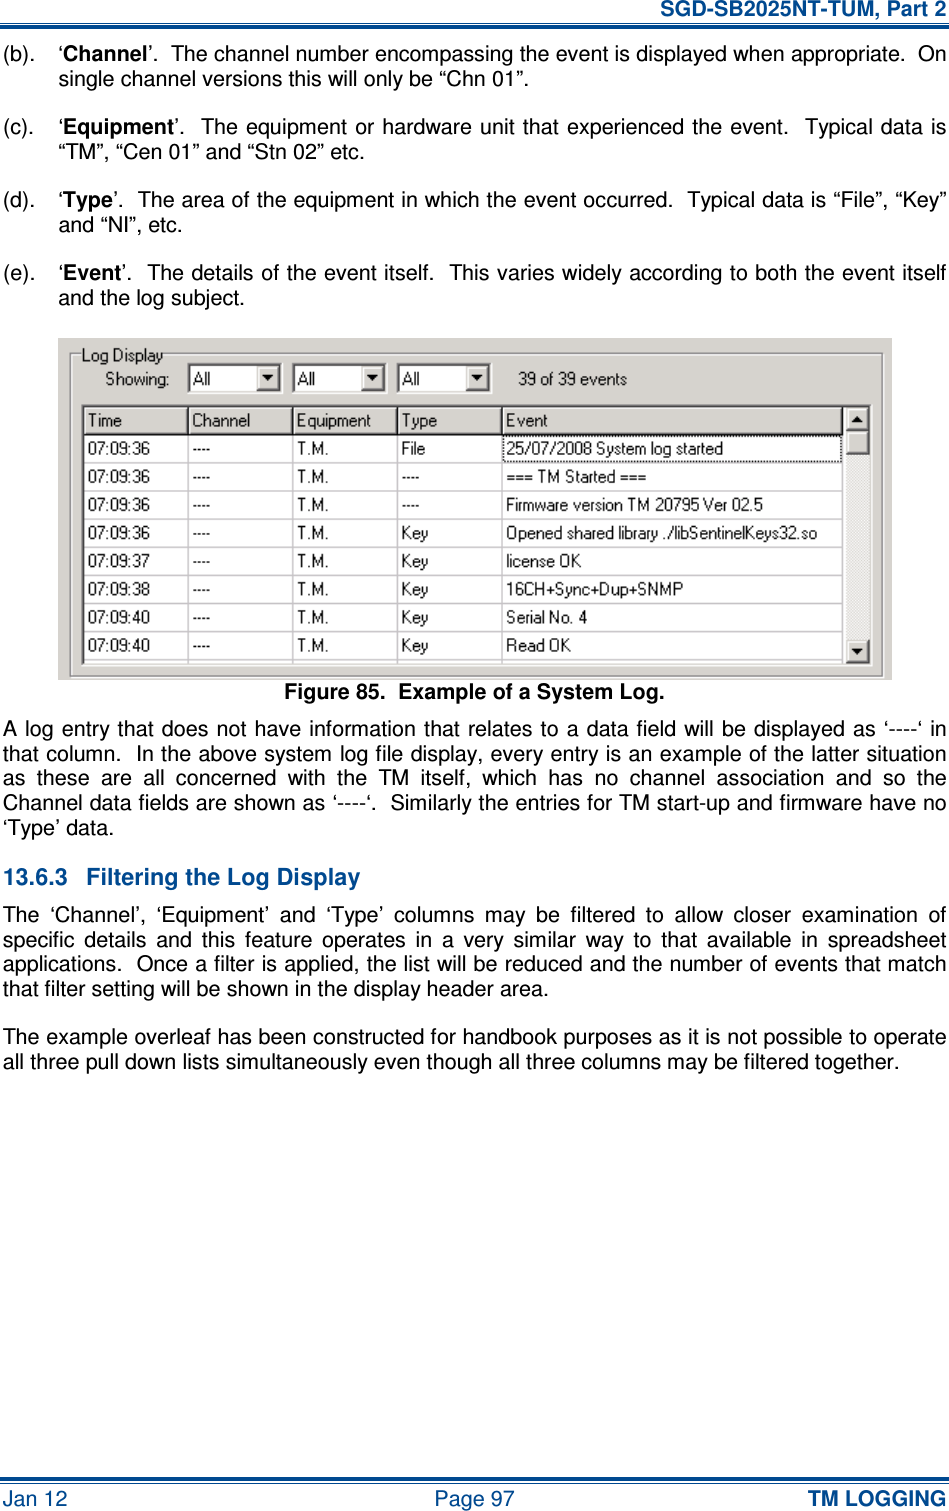   SGD-SB2025NT-TUM, Part 2 Jan 12  Page 97 TM LOGGING (b).  ‘Channel’.  The channel number encompassing the event is displayed when appropriate.  On single channel versions this will only be “Chn 01”. (c).  ‘Equipment’.  The equipment or hardware unit that experienced the event.  Typical data is “TM”, “Cen 01” and “Stn 02” etc. (d).  ‘Type’.  The area of the equipment in which the event occurred.  Typical data is “File”, “Key” and “NI”, etc. (e).  ‘Event’.  The details of the event itself.  This varies widely according to both the event itself and the log subject. Figure 85.  Example of a System Log. A log entry that does not have information that relates to a data field will be displayed as ‘----‘ in that column.  In the above system log file display, every entry is an example of the latter situation as  these  are  all  concerned  with  the  TM  itself,  which  has  no  channel  association  and  so  the Channel data fields are shown as ‘----‘.  Similarly the entries for TM start-up and firmware have no ‘Type’ data. 13.6.3  Filtering the Log Display The  ‘Channel’,  ‘Equipment’  and  ‘Type’  columns  may  be  filtered  to  allow  closer  examination  of specific  details  and  this  feature  operates  in  a  very  similar  way  to  that  available  in  spreadsheet applications.  Once a filter is applied, the list will be reduced and the number of events that match that filter setting will be shown in the display header area. The example overleaf has been constructed for handbook purposes as it is not possible to operate all three pull down lists simultaneously even though all three columns may be filtered together. 